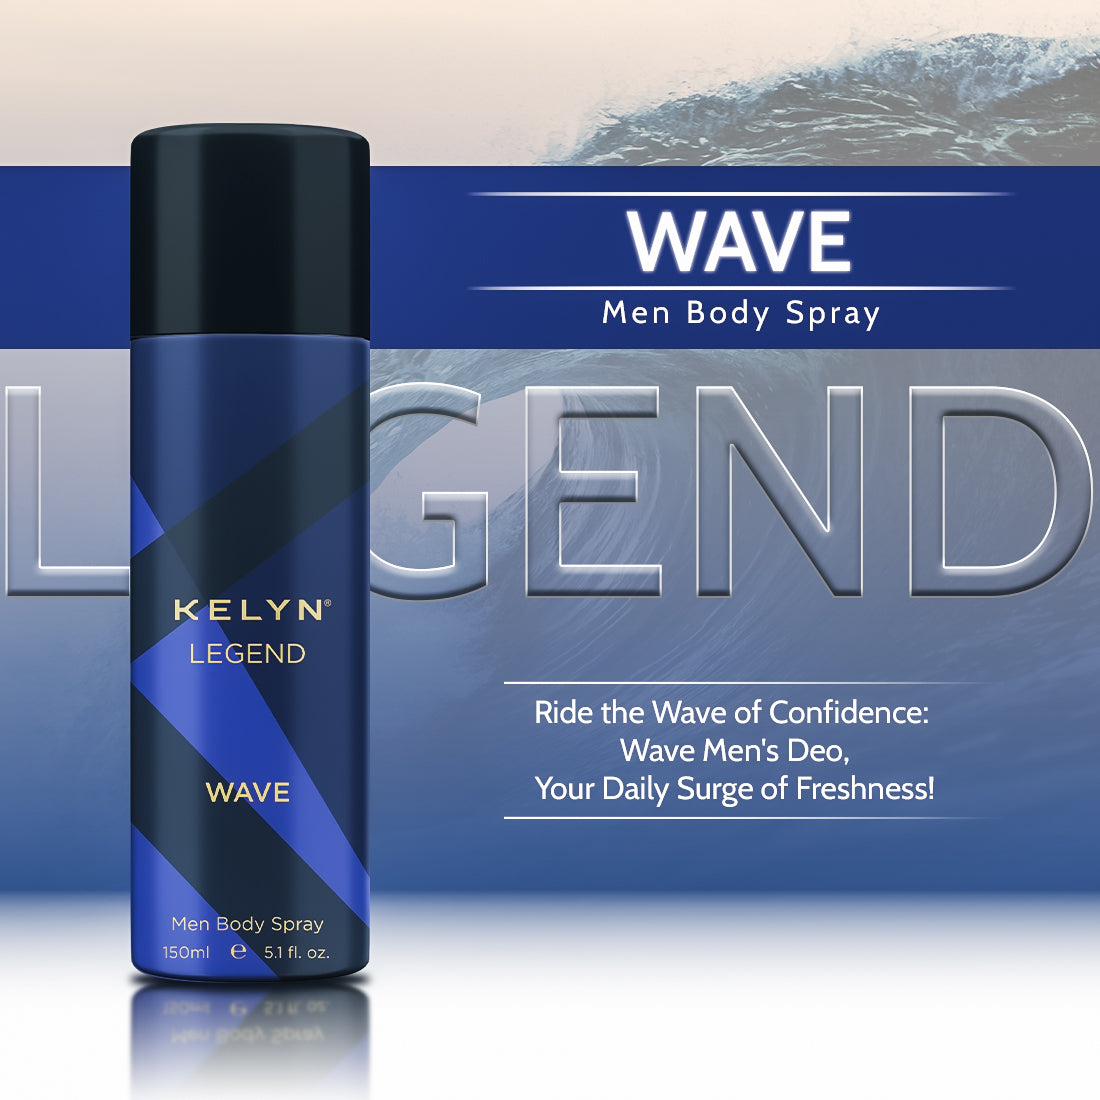 Legend Storm, Twister, Wave Combo Deodorant for Men Body Spray (Pack of 3) 150 ml each